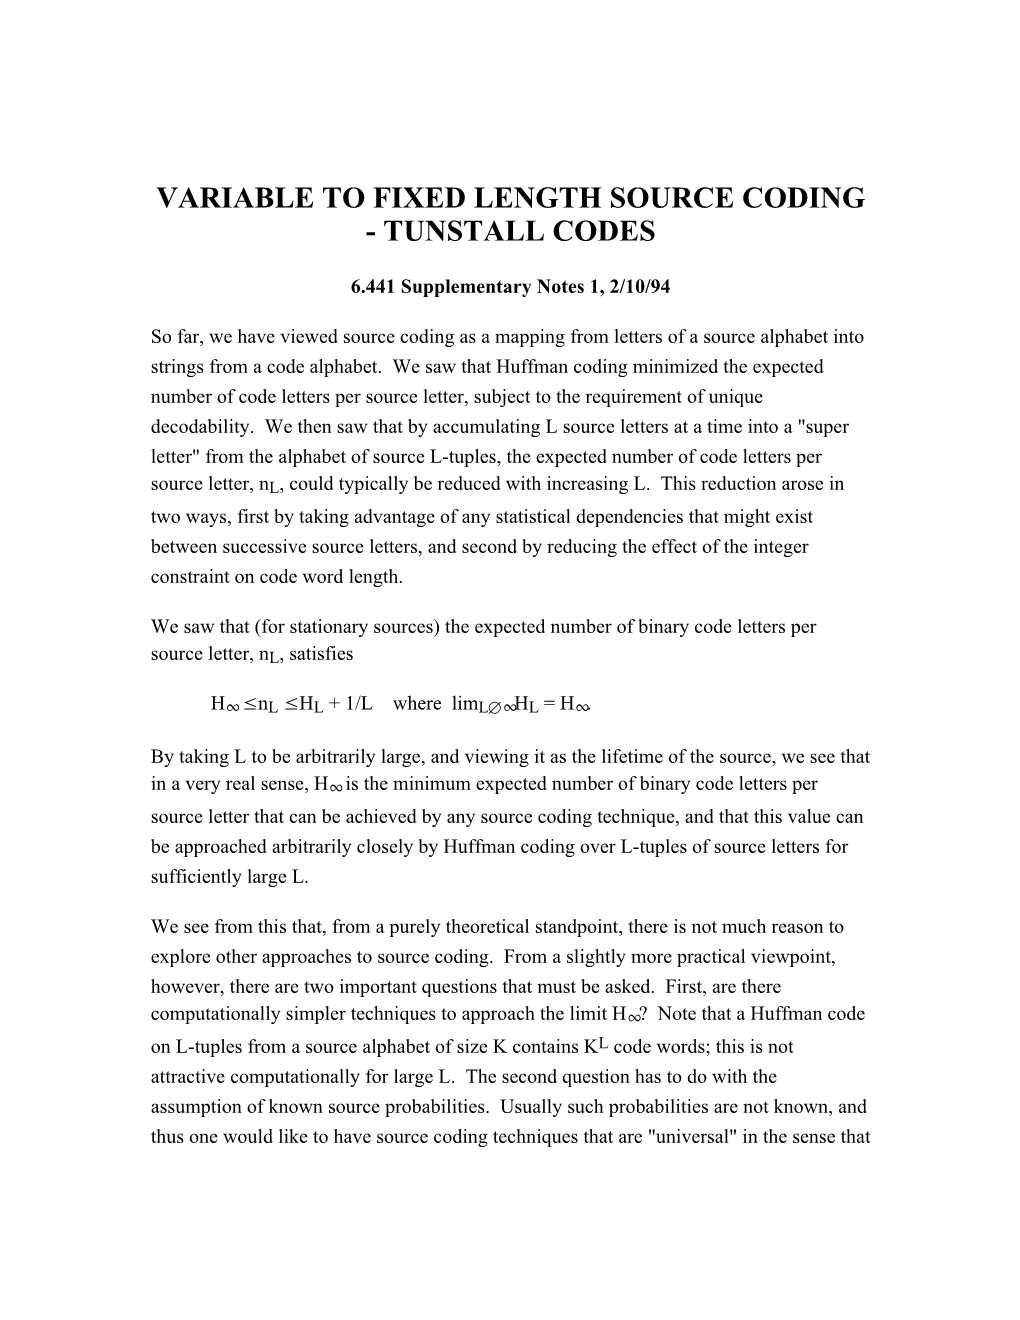 Variable to Fixed Length Source Coding - Tunstall Codes